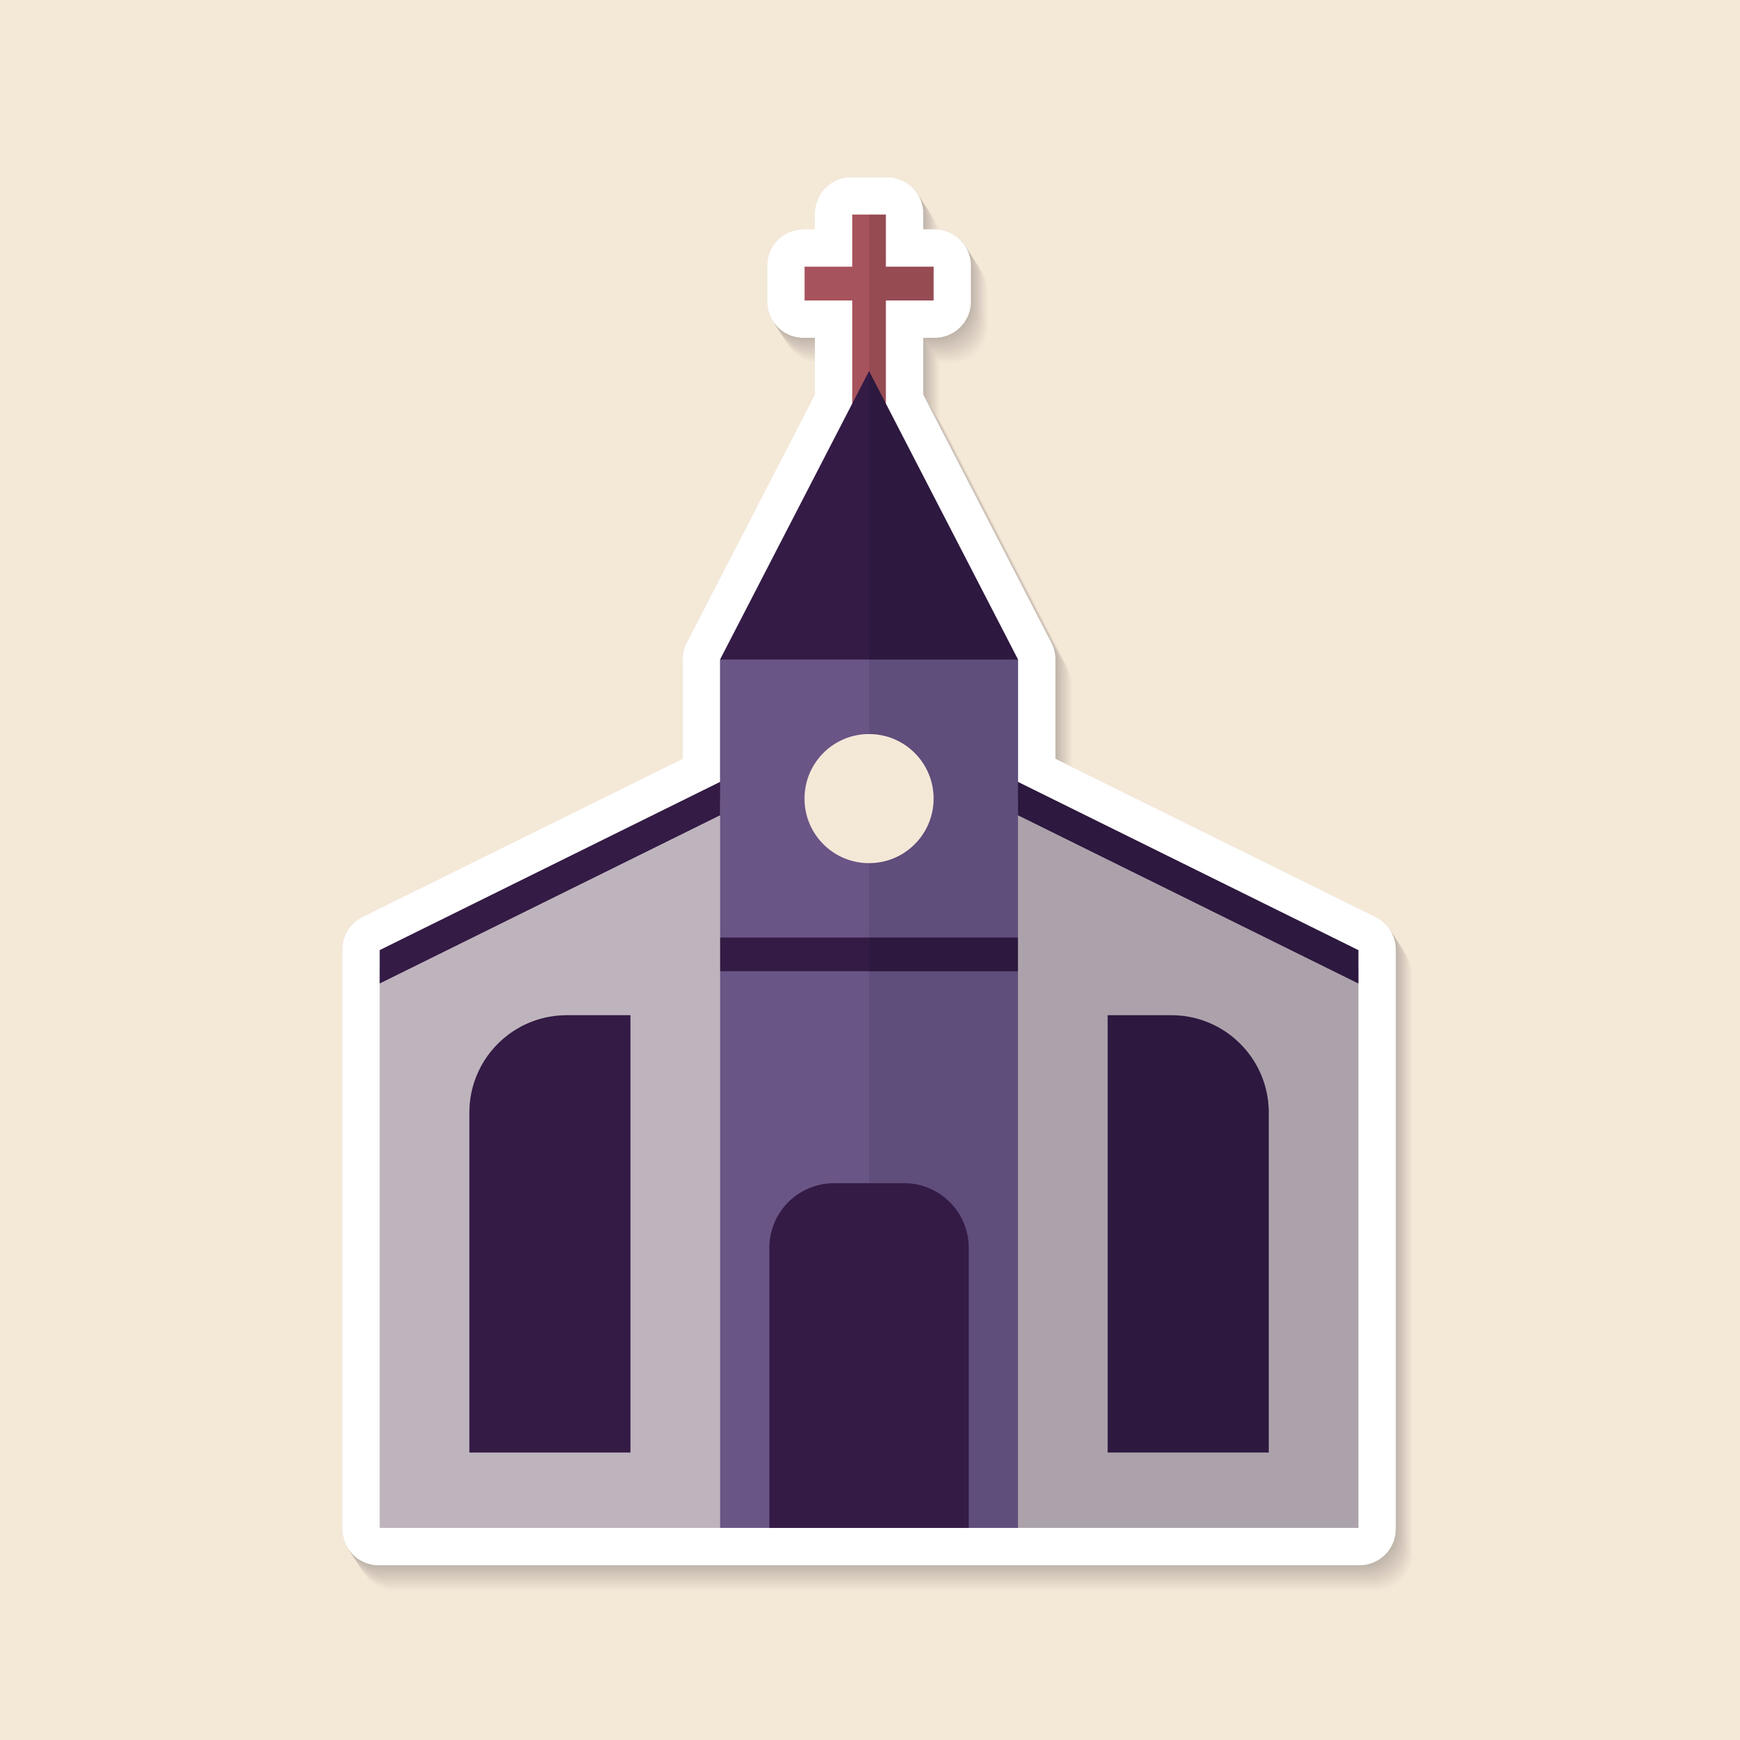 Image of church by rawpixel.com